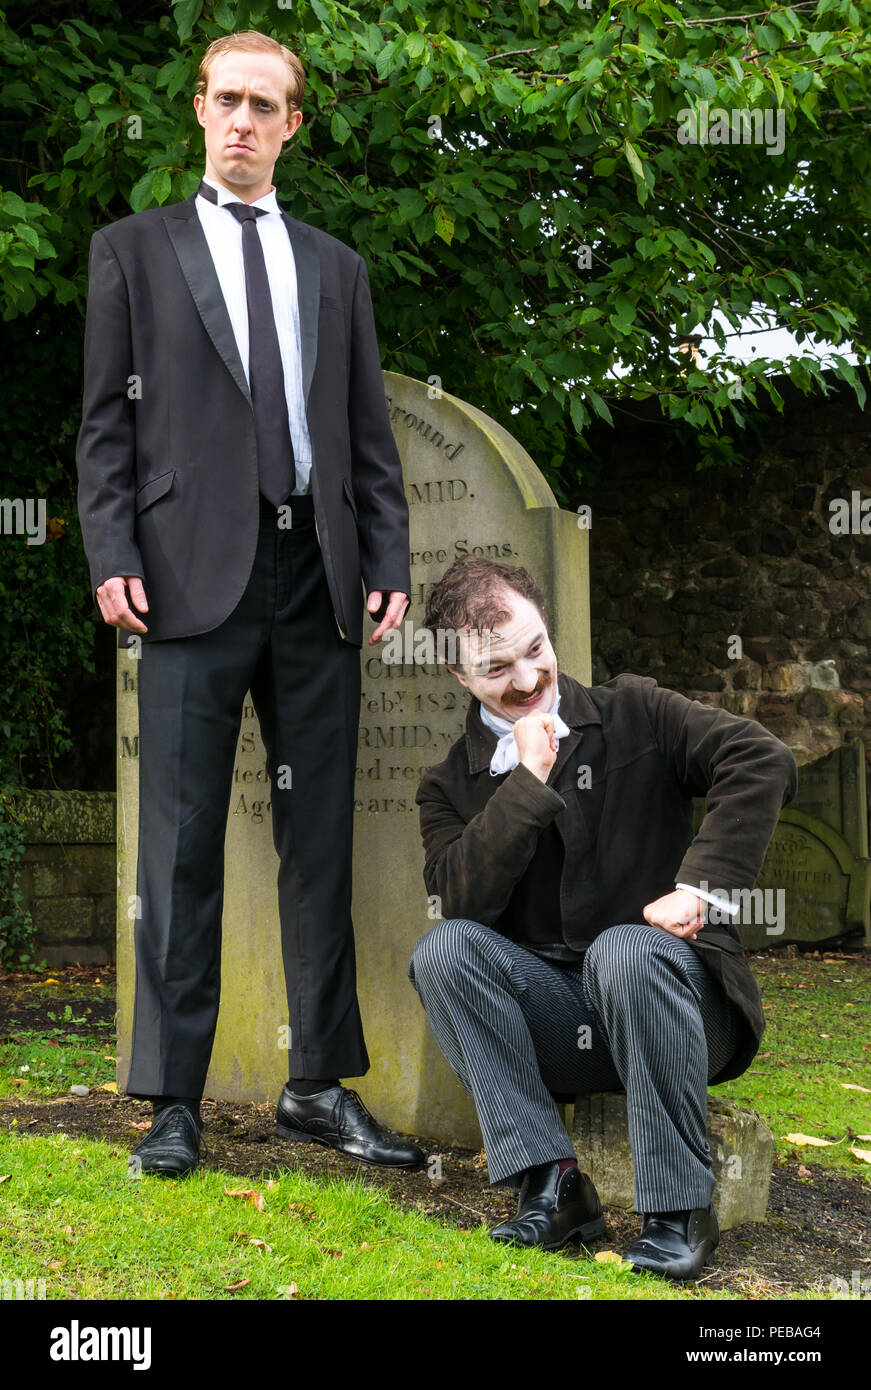 Edinburgh, Scotland, UK. 14th August 2018. Edinburgh Fringe Festival Canongate churchyard, Edinburgh, Scotland, United Kingdom. Winners of Show of the Week Award at VAULT Festival 2018, Dominic Allen and Simon Maeder present Providence, a dark comedy about the life and works of America’s horror writer, HP Lovecraft by Turnpike Productions. Simon Maeder plays HP Lovecraft and Dominic Allen plays Edgar Allan Poe Stock Photo